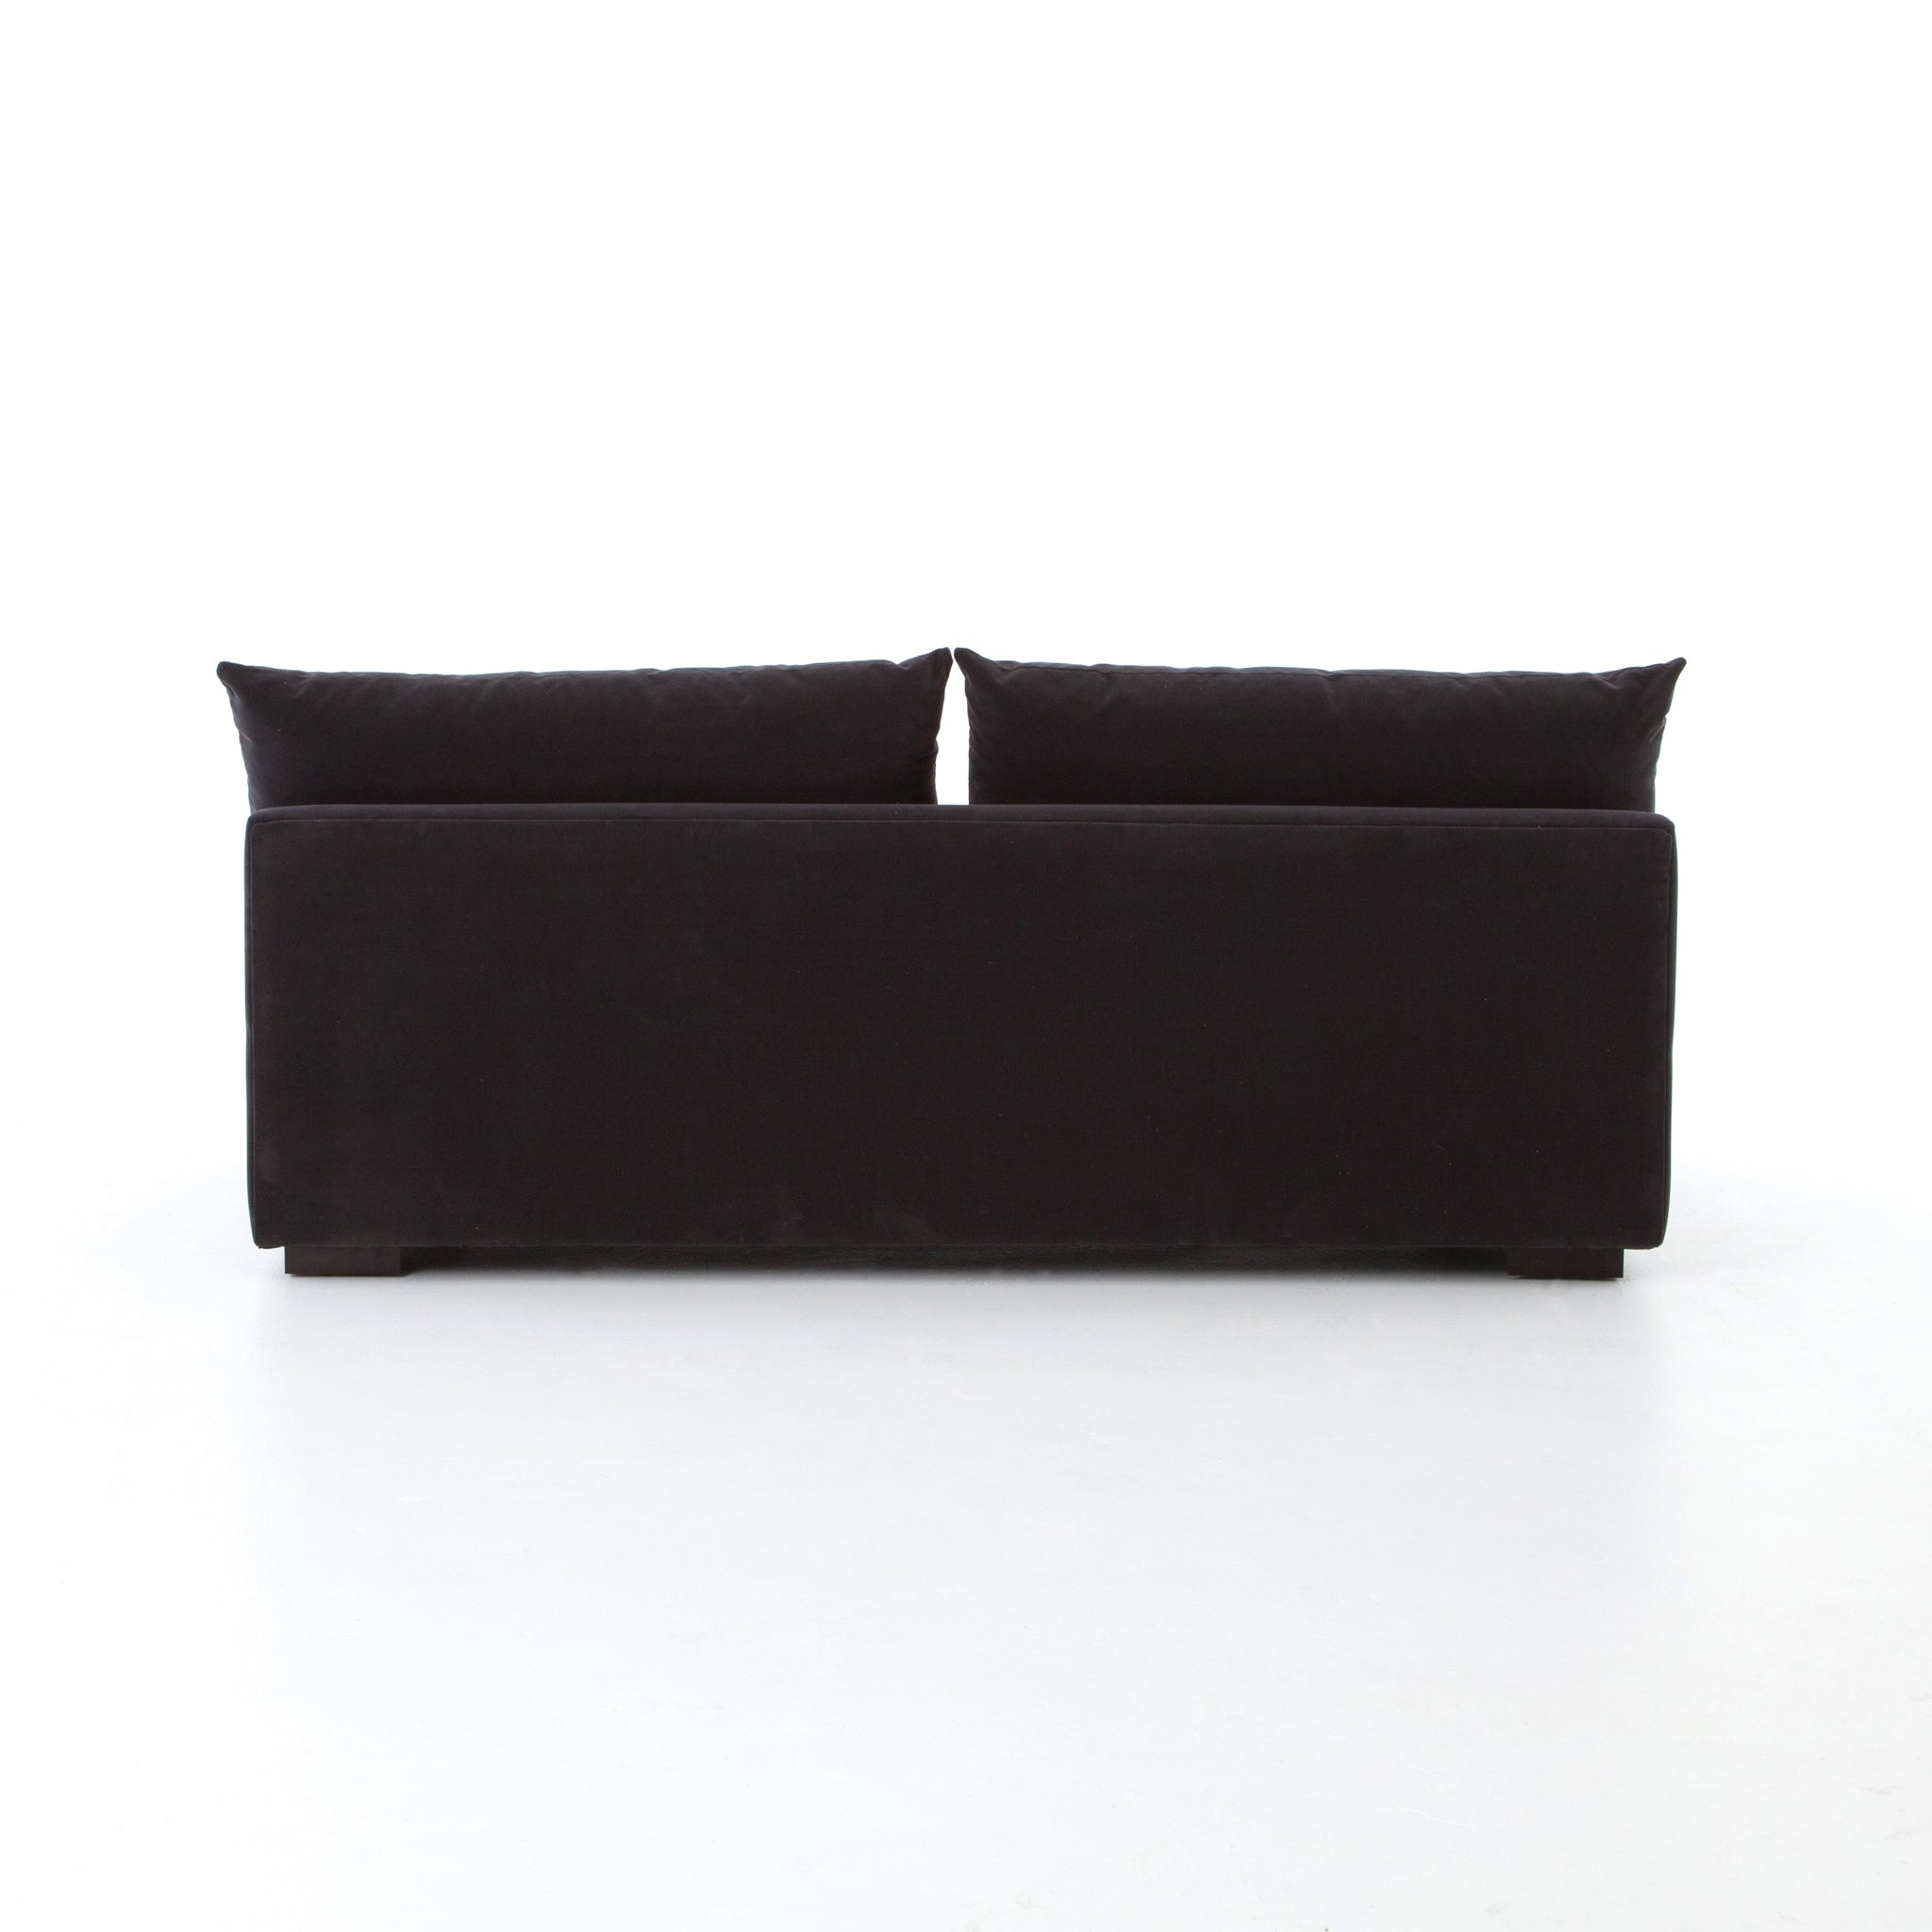 The upholstery of this Grant Armless Piece - Henry Charcoal is soft, durable, and stain-resistance, making it the perfect choice for families or those who love to cuddle with their furry friends.   Overall Dimensions: 72.00"w x 40.00"d x 31.50"h